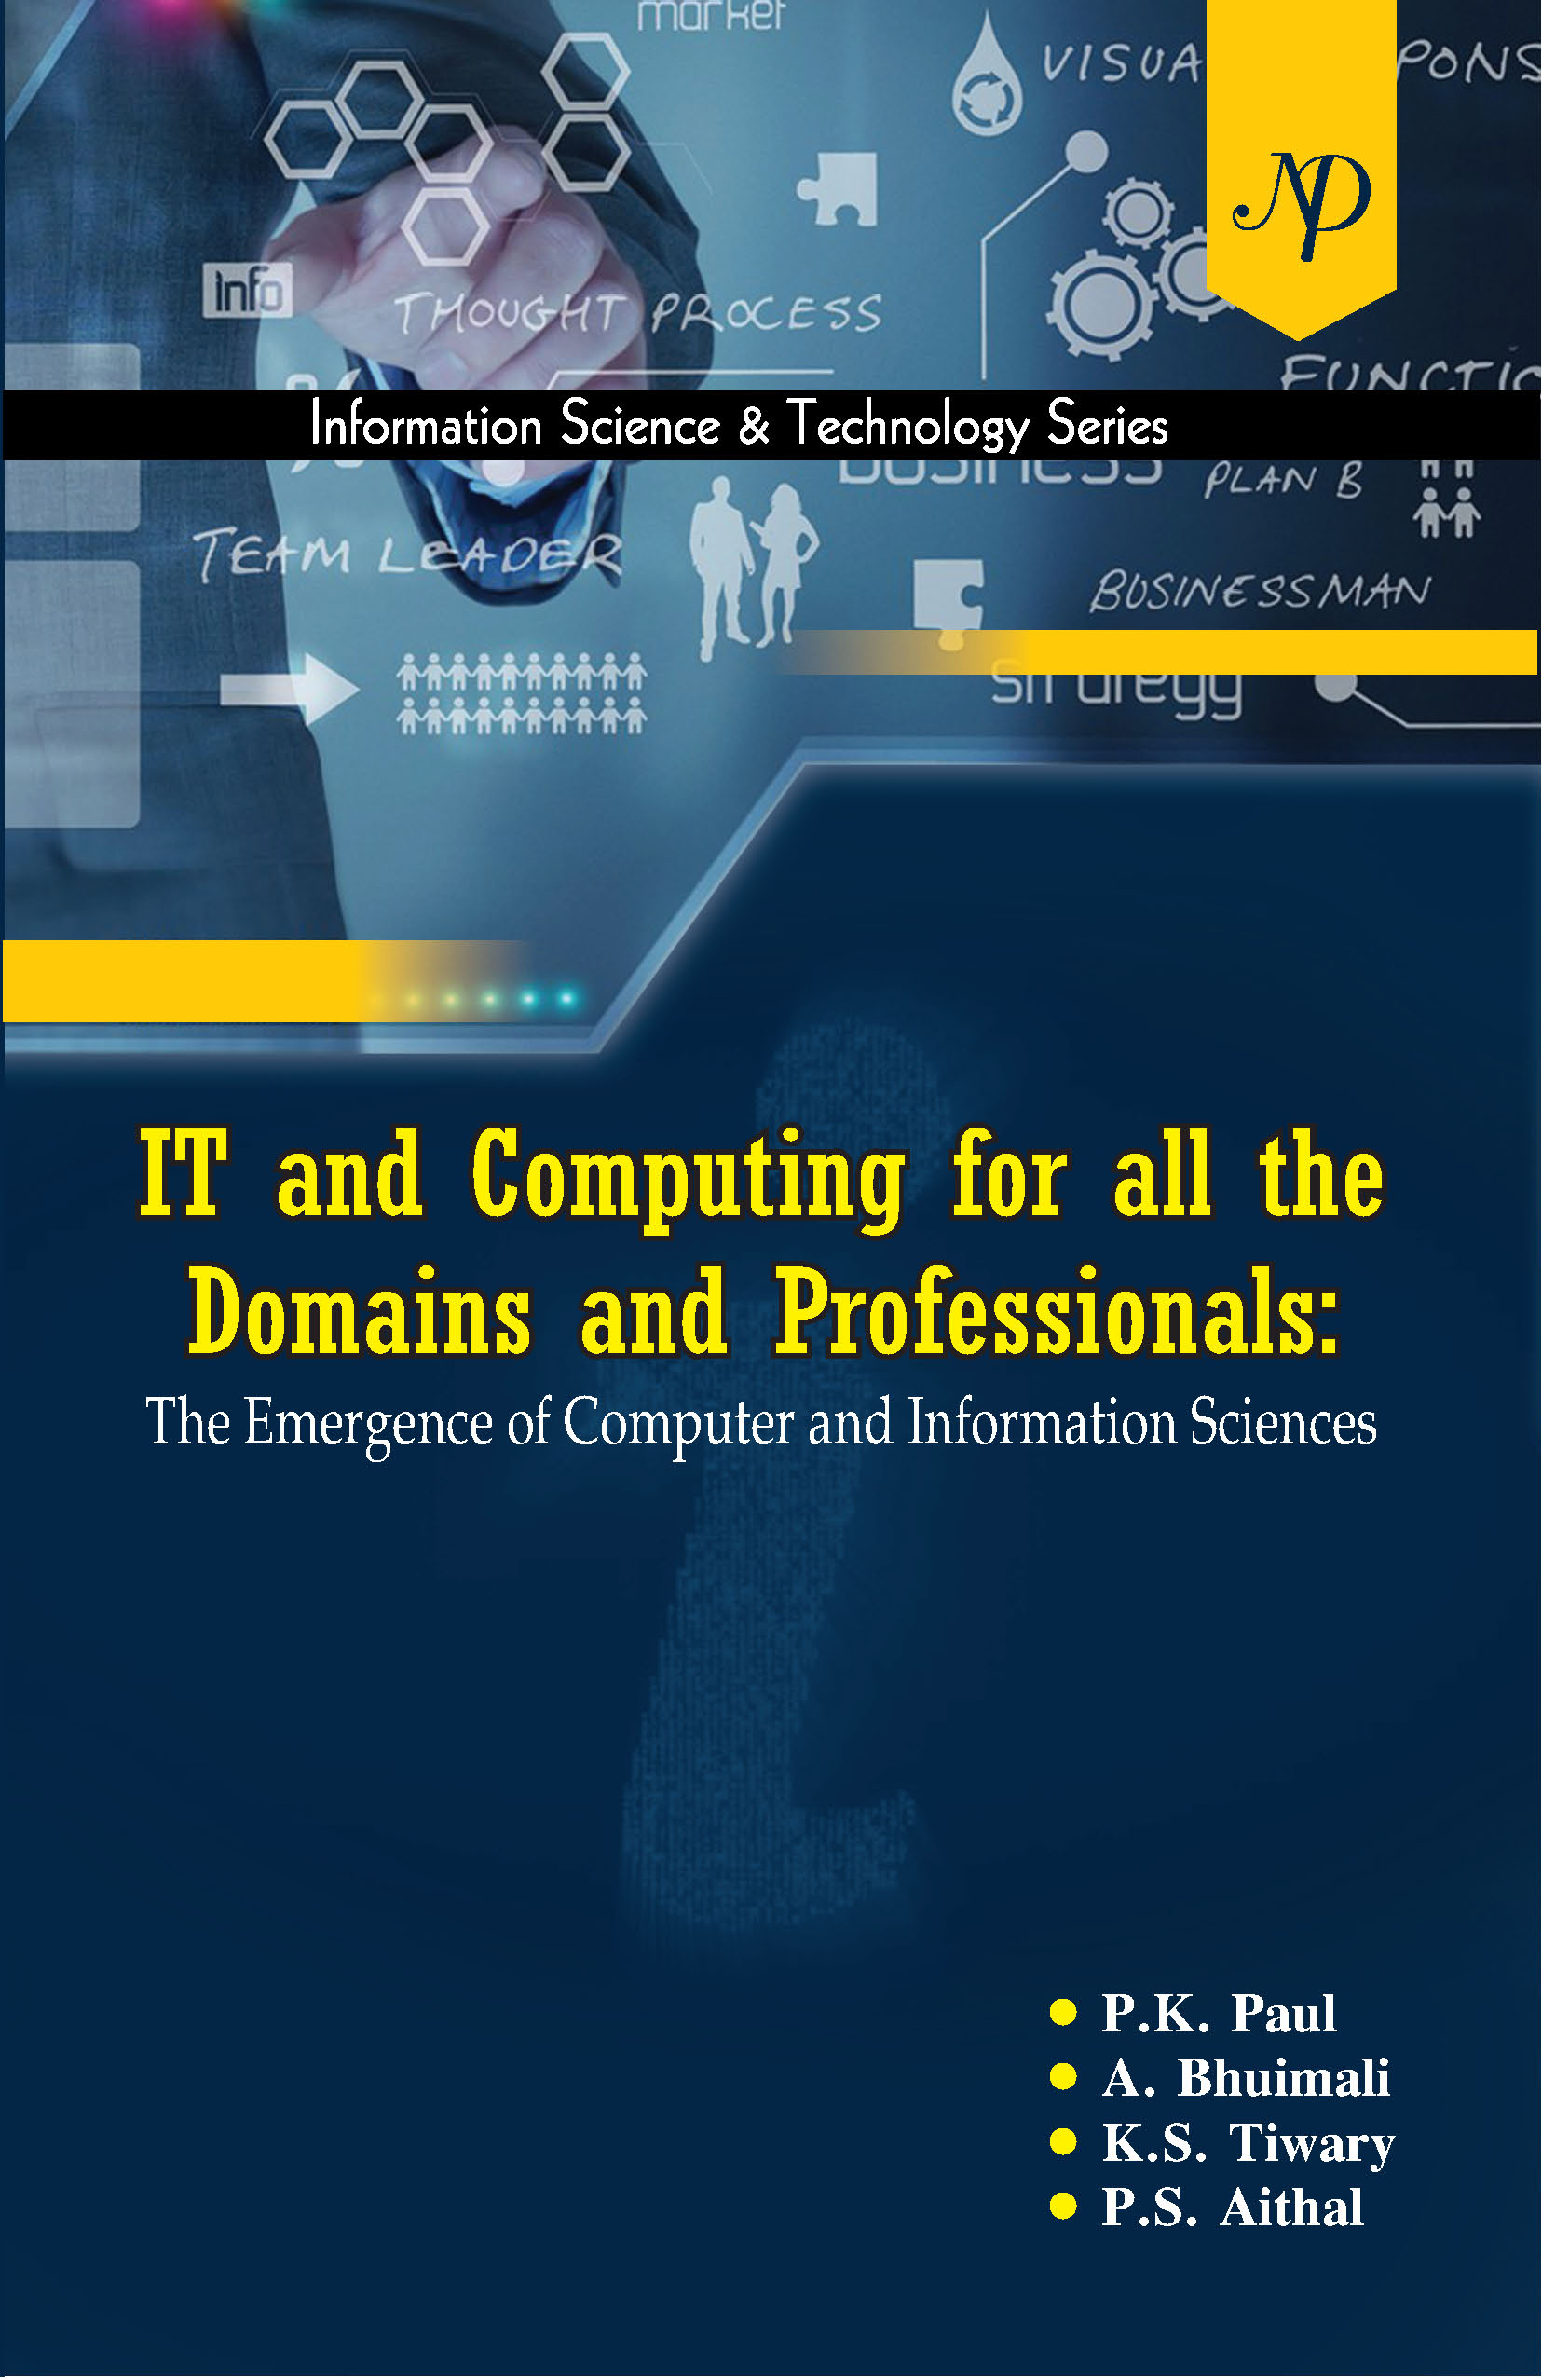 IT and Computing for all the domains by PK Paul.jpg